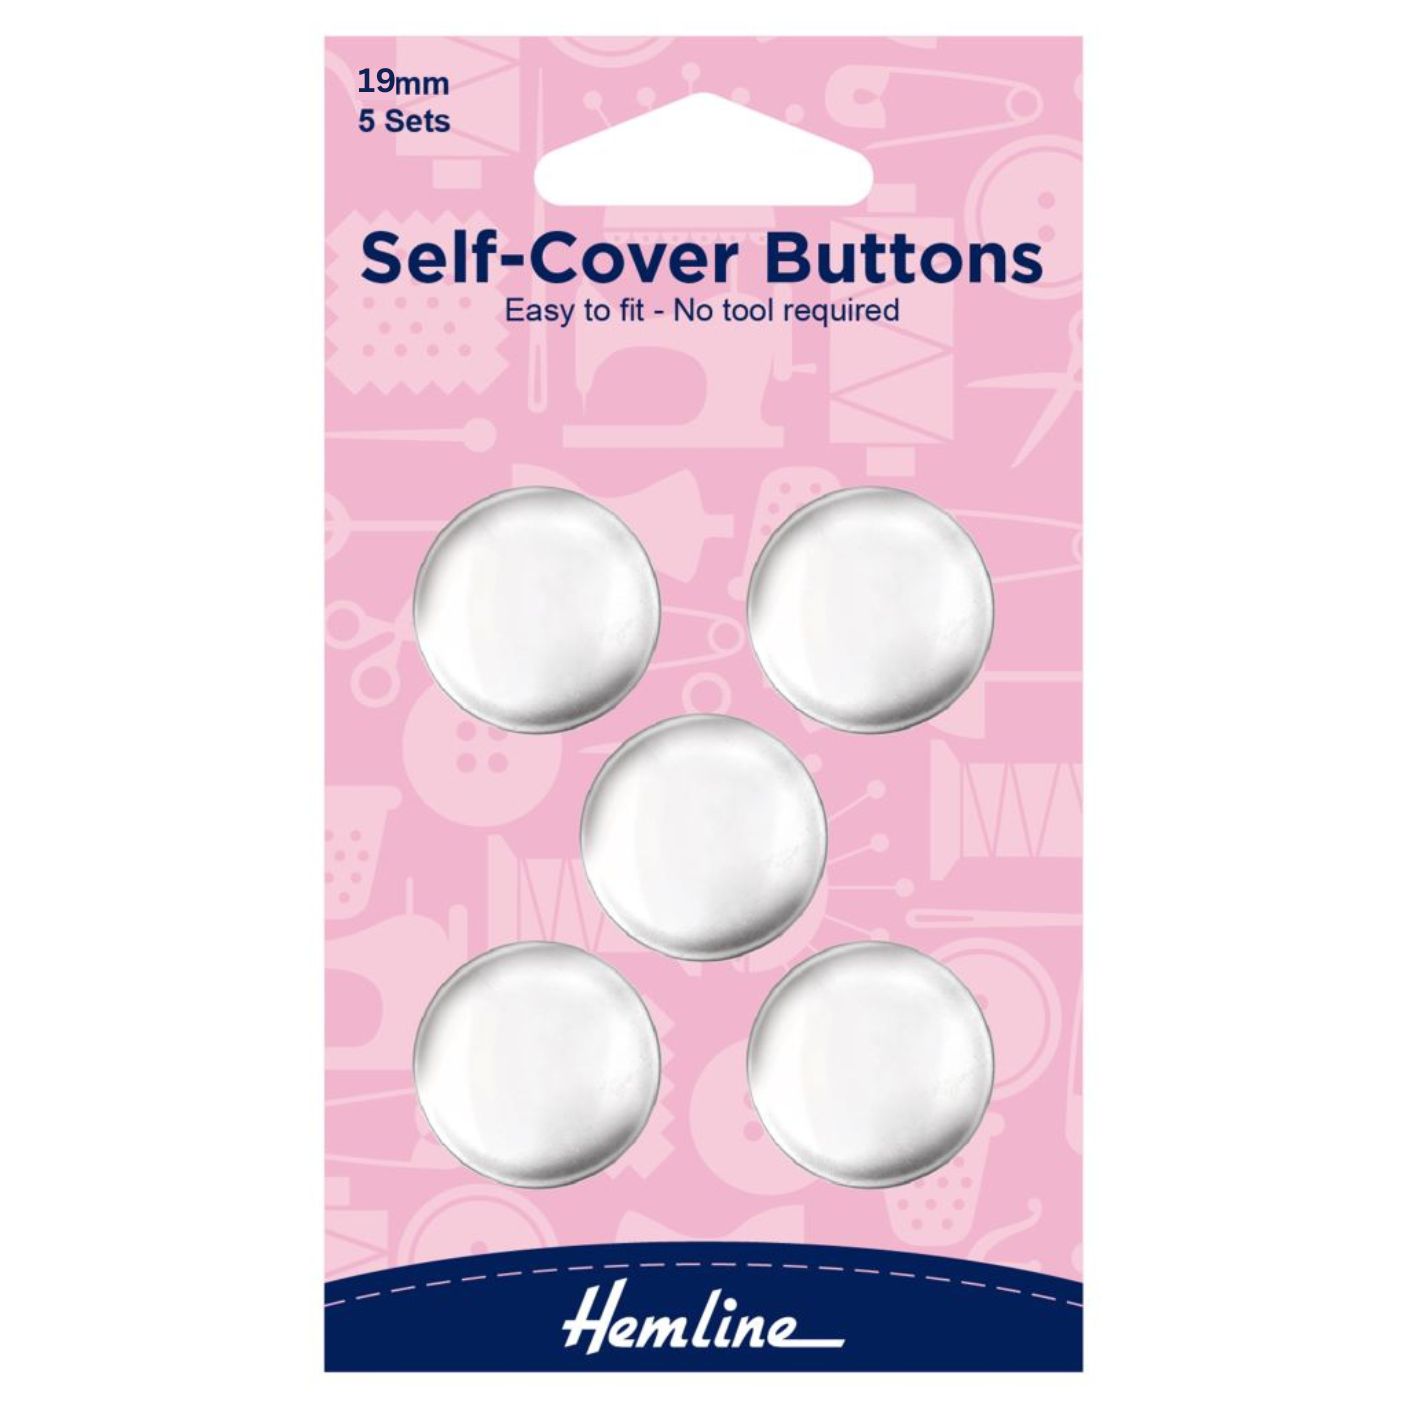 How to Use Self-Cover Buttons 